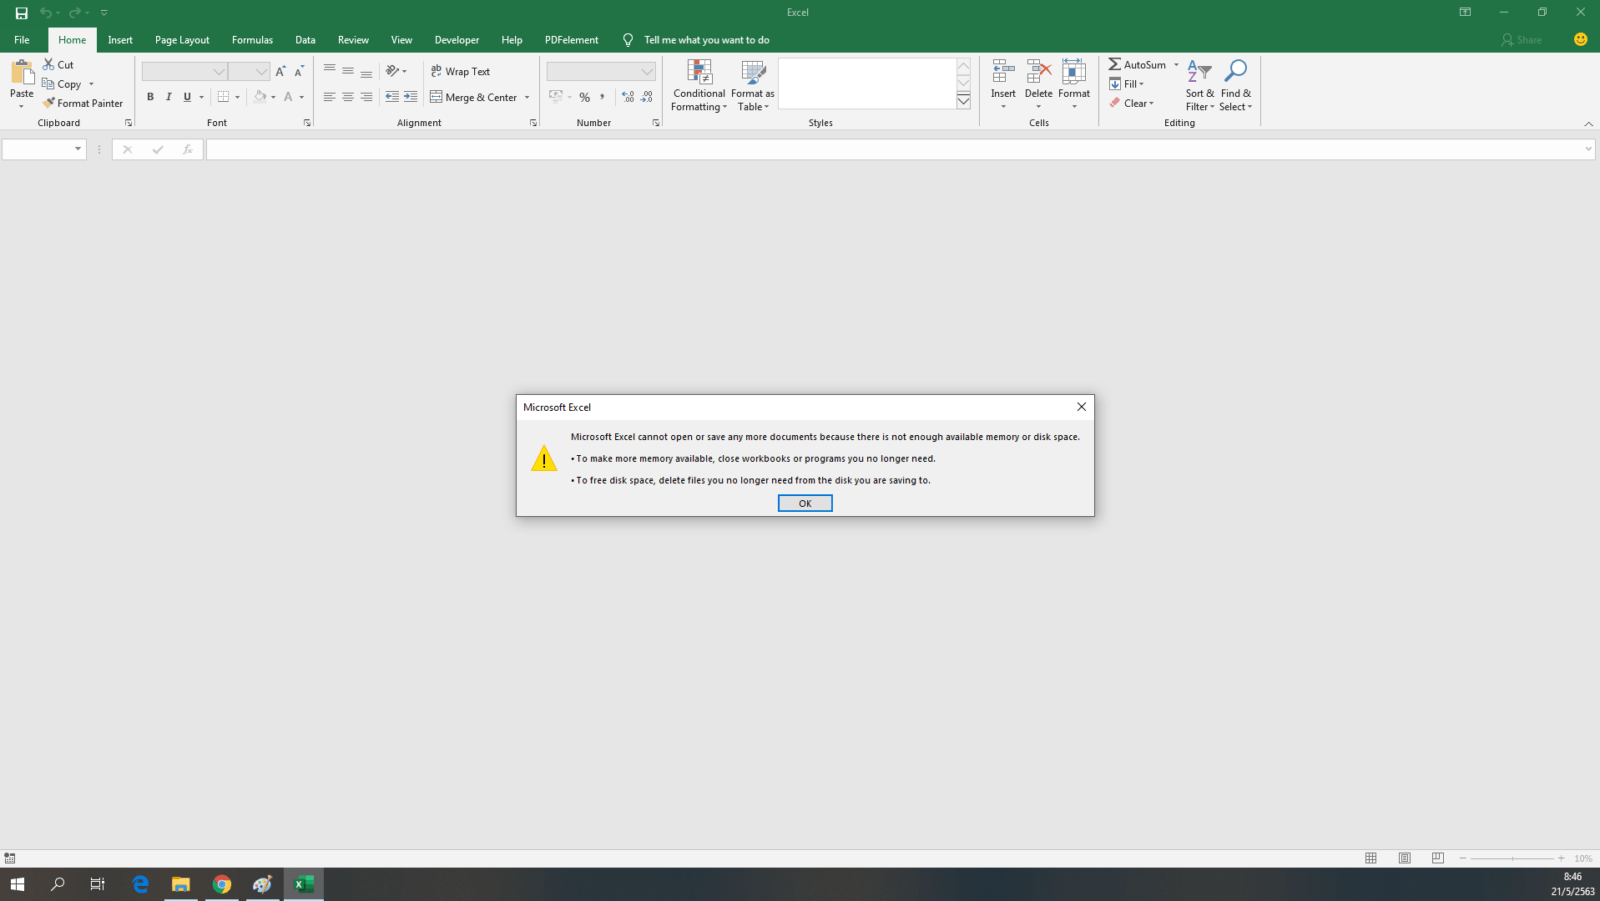 Microsoft Excel cannot open or save any more documents because there is not enough available memory or disk space.